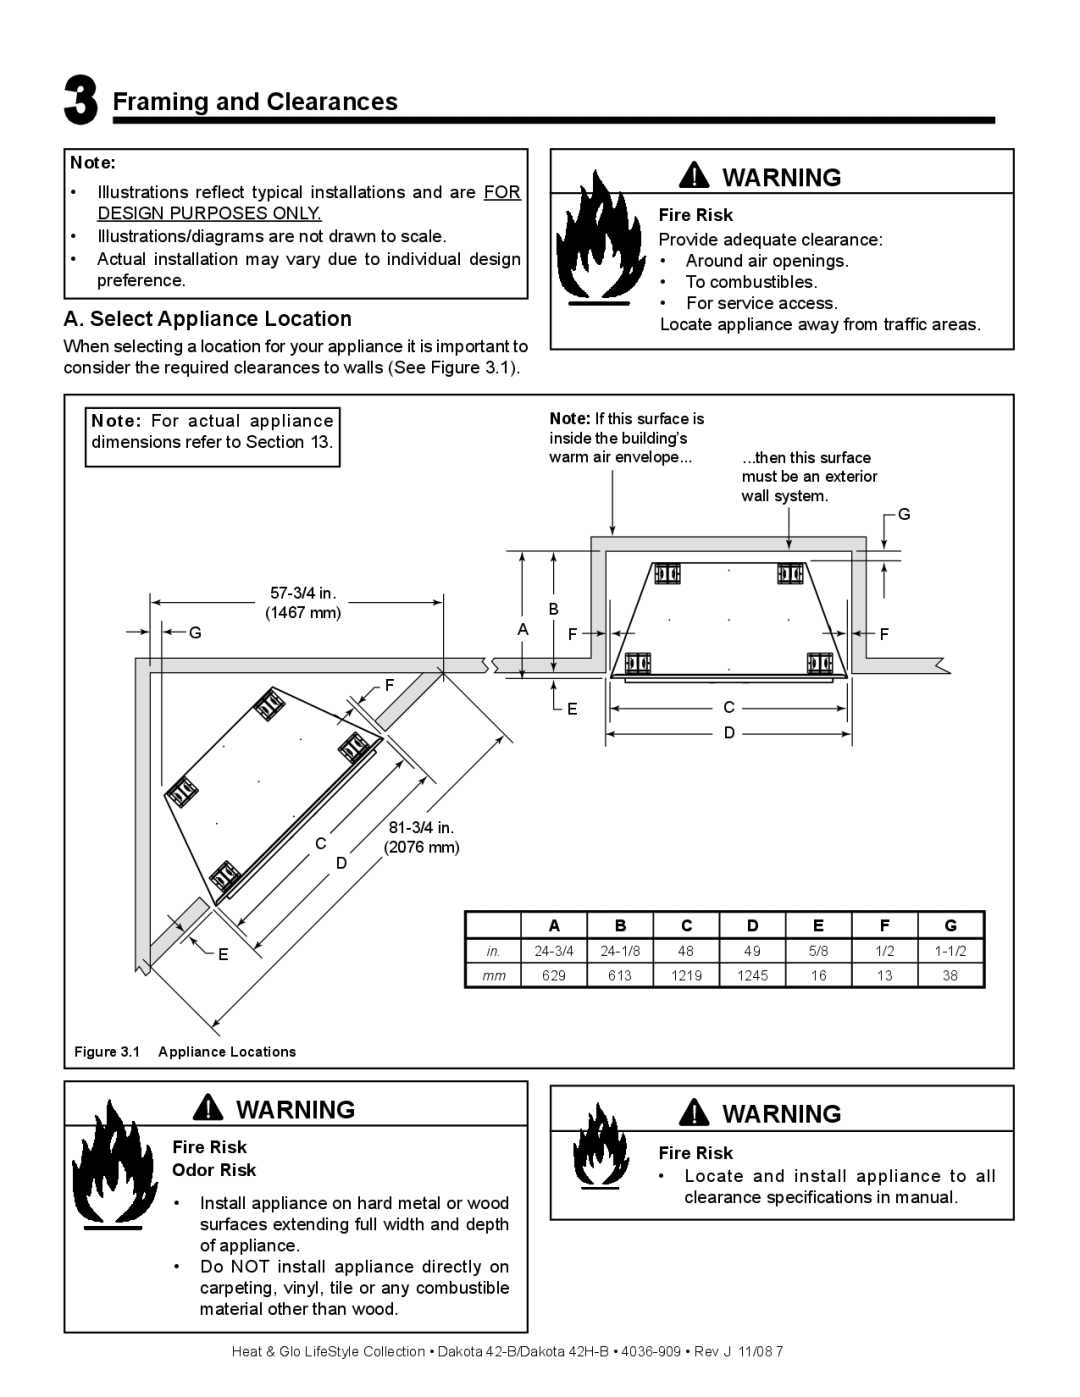 Hearth and Home Technologies 42-B, 42H-B Framing and Clearances, Select Appliance Location, Fire Risk Odor Risk 